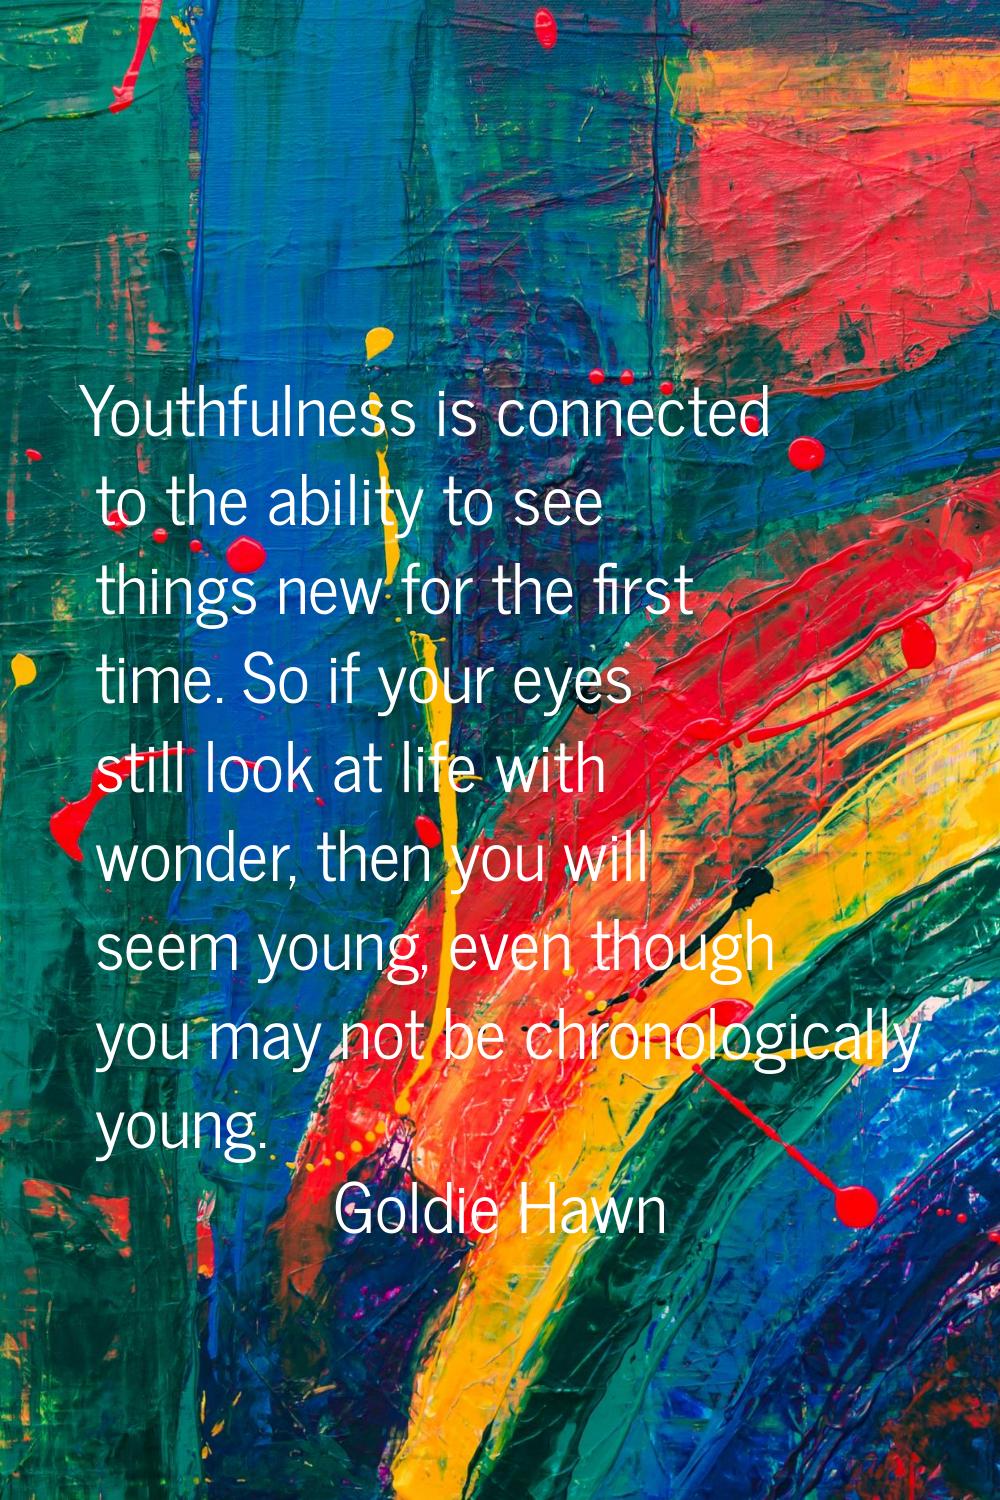 Youthfulness is connected to the ability to see things new for the first time. So if your eyes stil